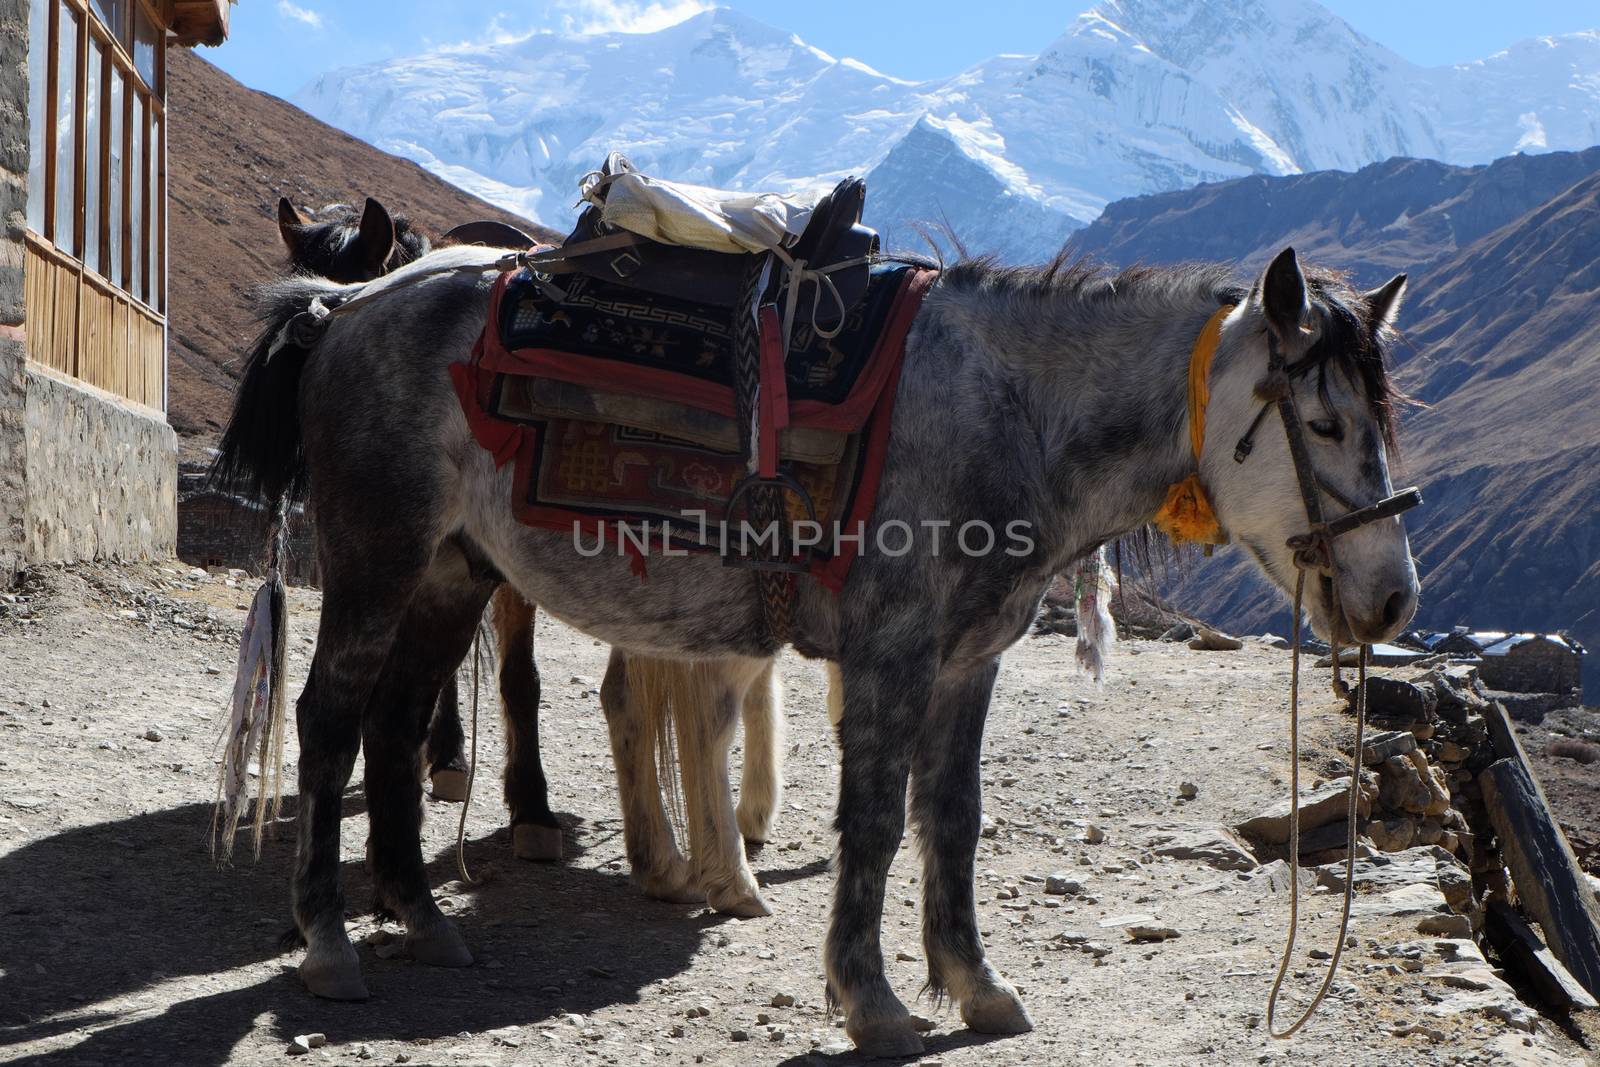 The Nepal mountain horse is high in the mountains, under the saddle and in the bridle.